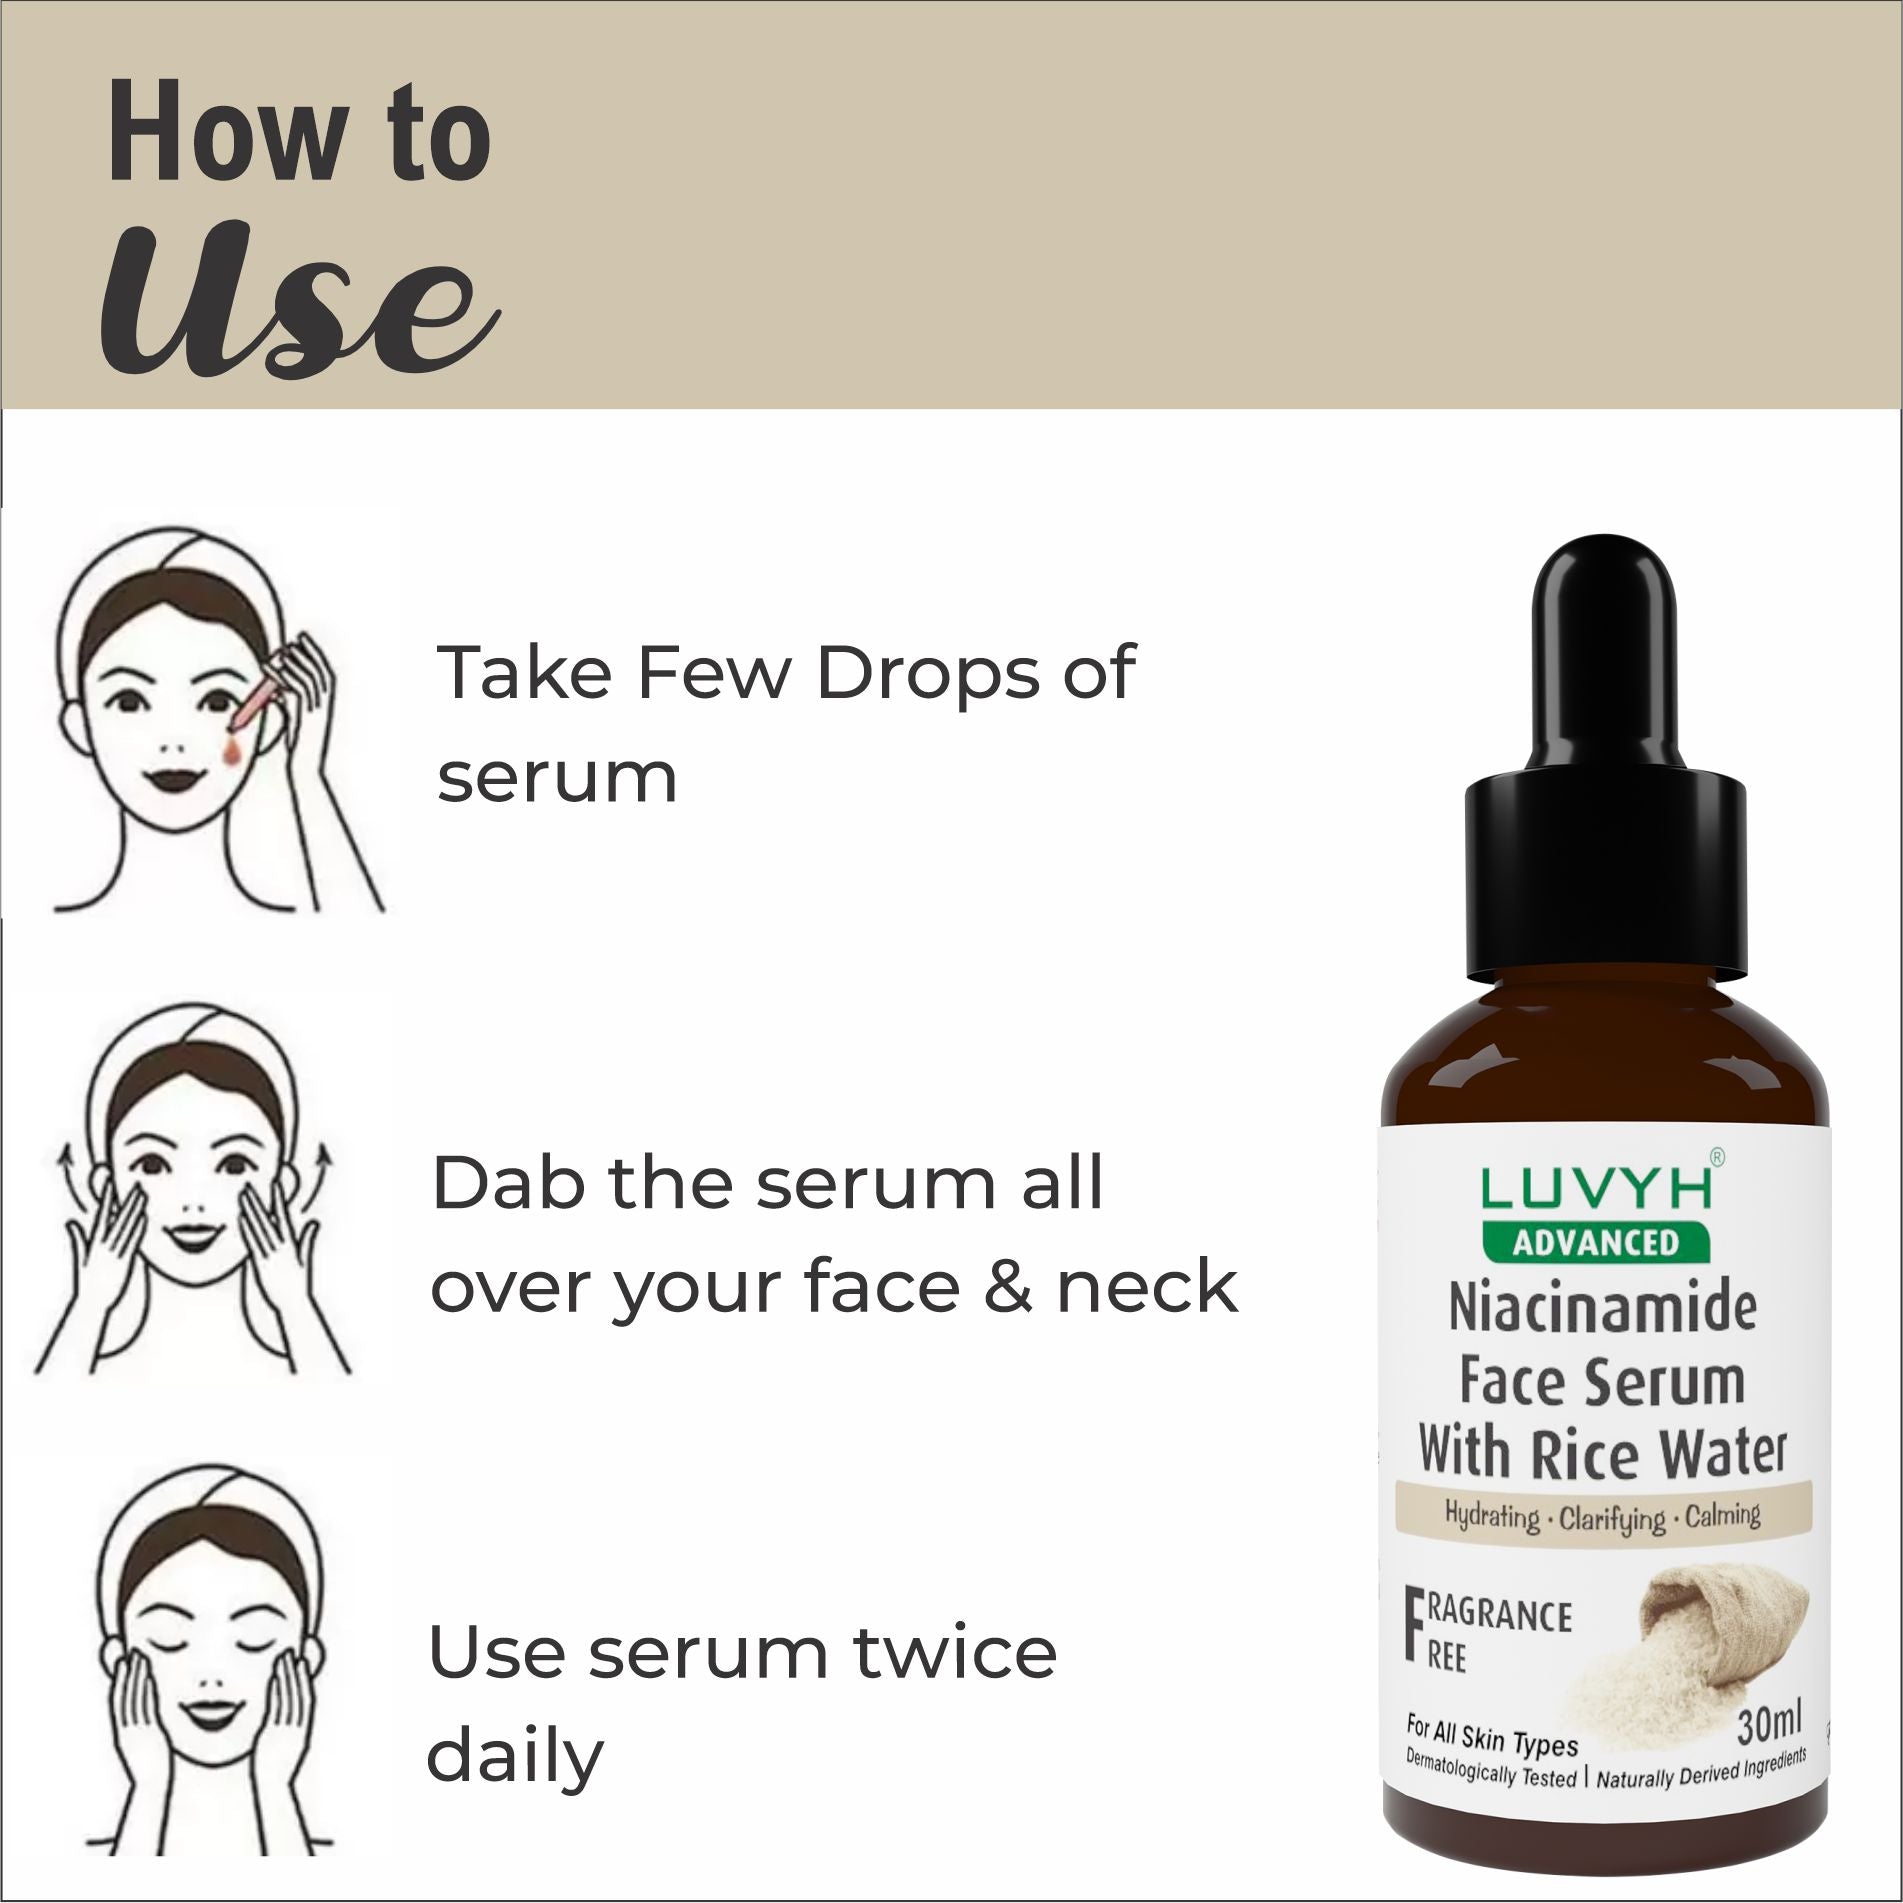 How to Use - Niacinamide Face Serum with Rice Water Serum